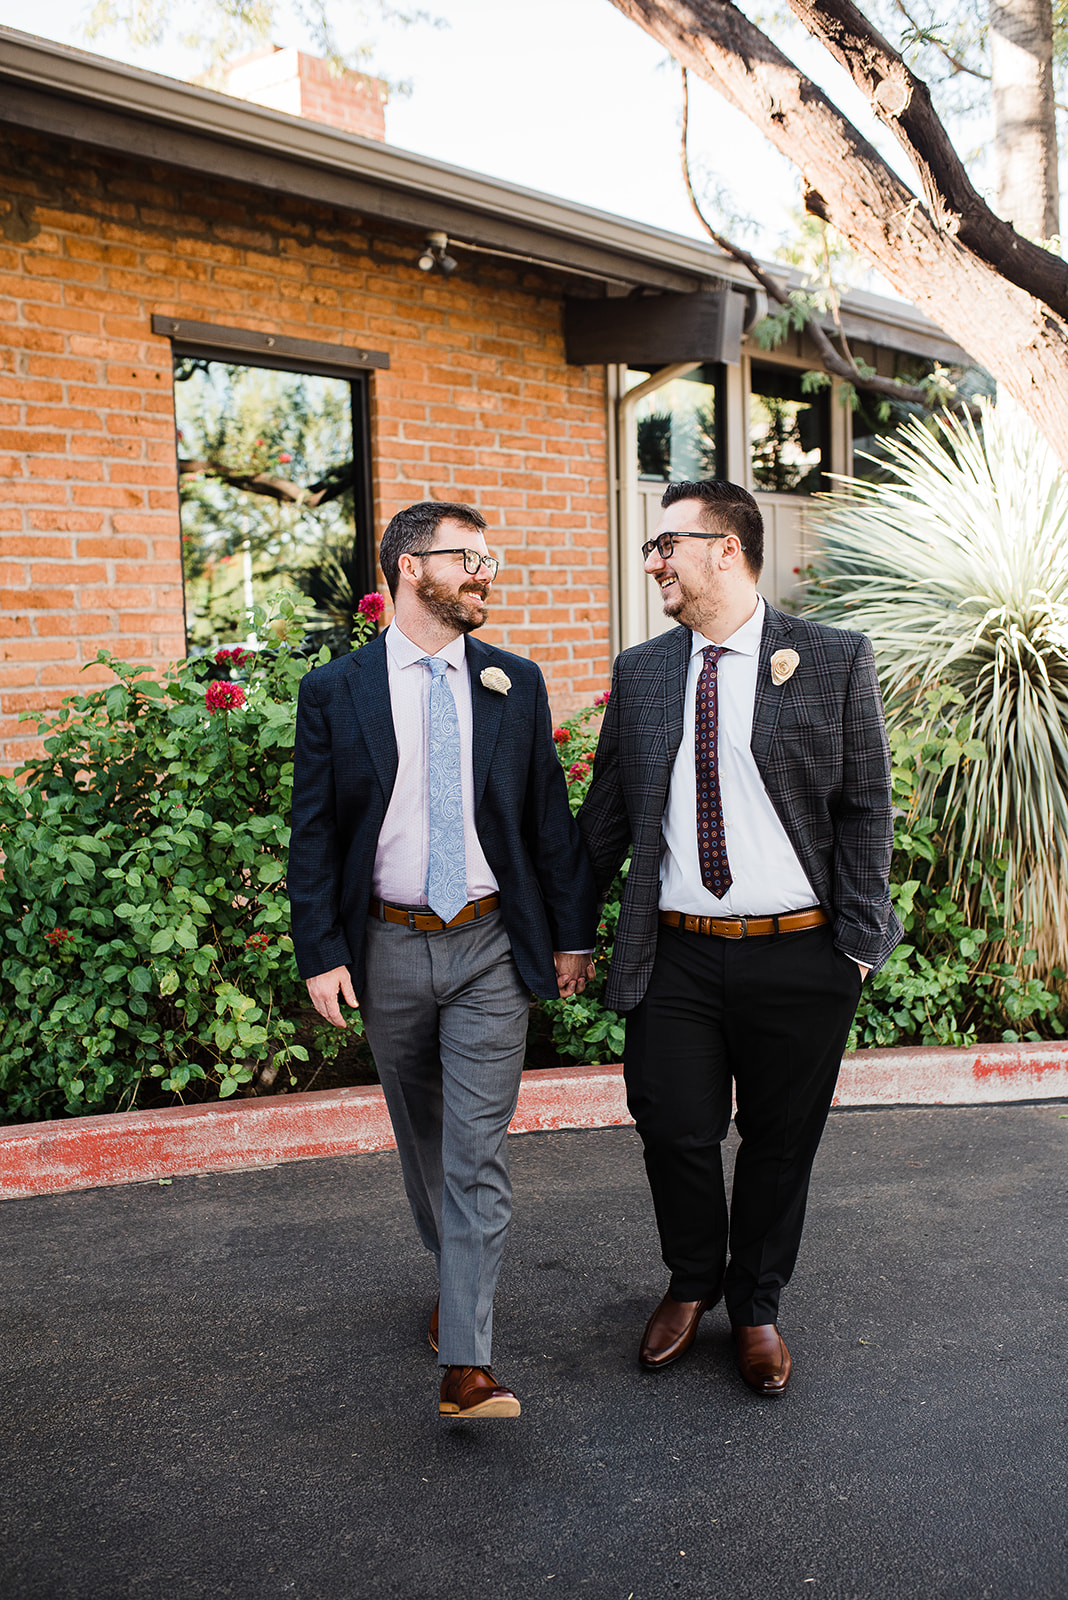 Newlywed men in suits with brown belts and shoes walk down the street in front of a brick building The Newton Phoenix